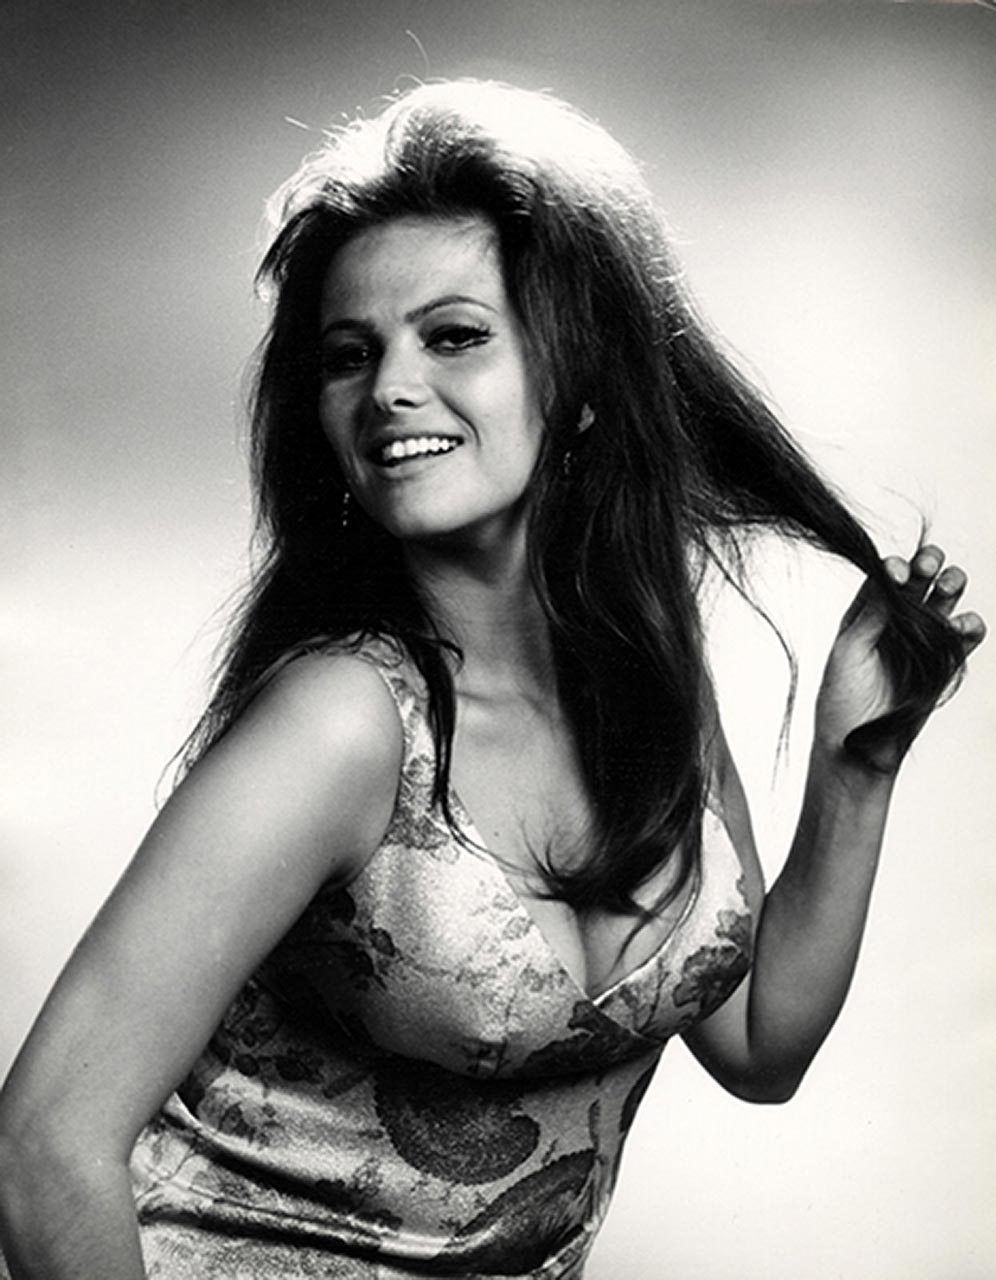 Claudia Cardinale naked celebrity pictures - Celebrity leaked Nudes